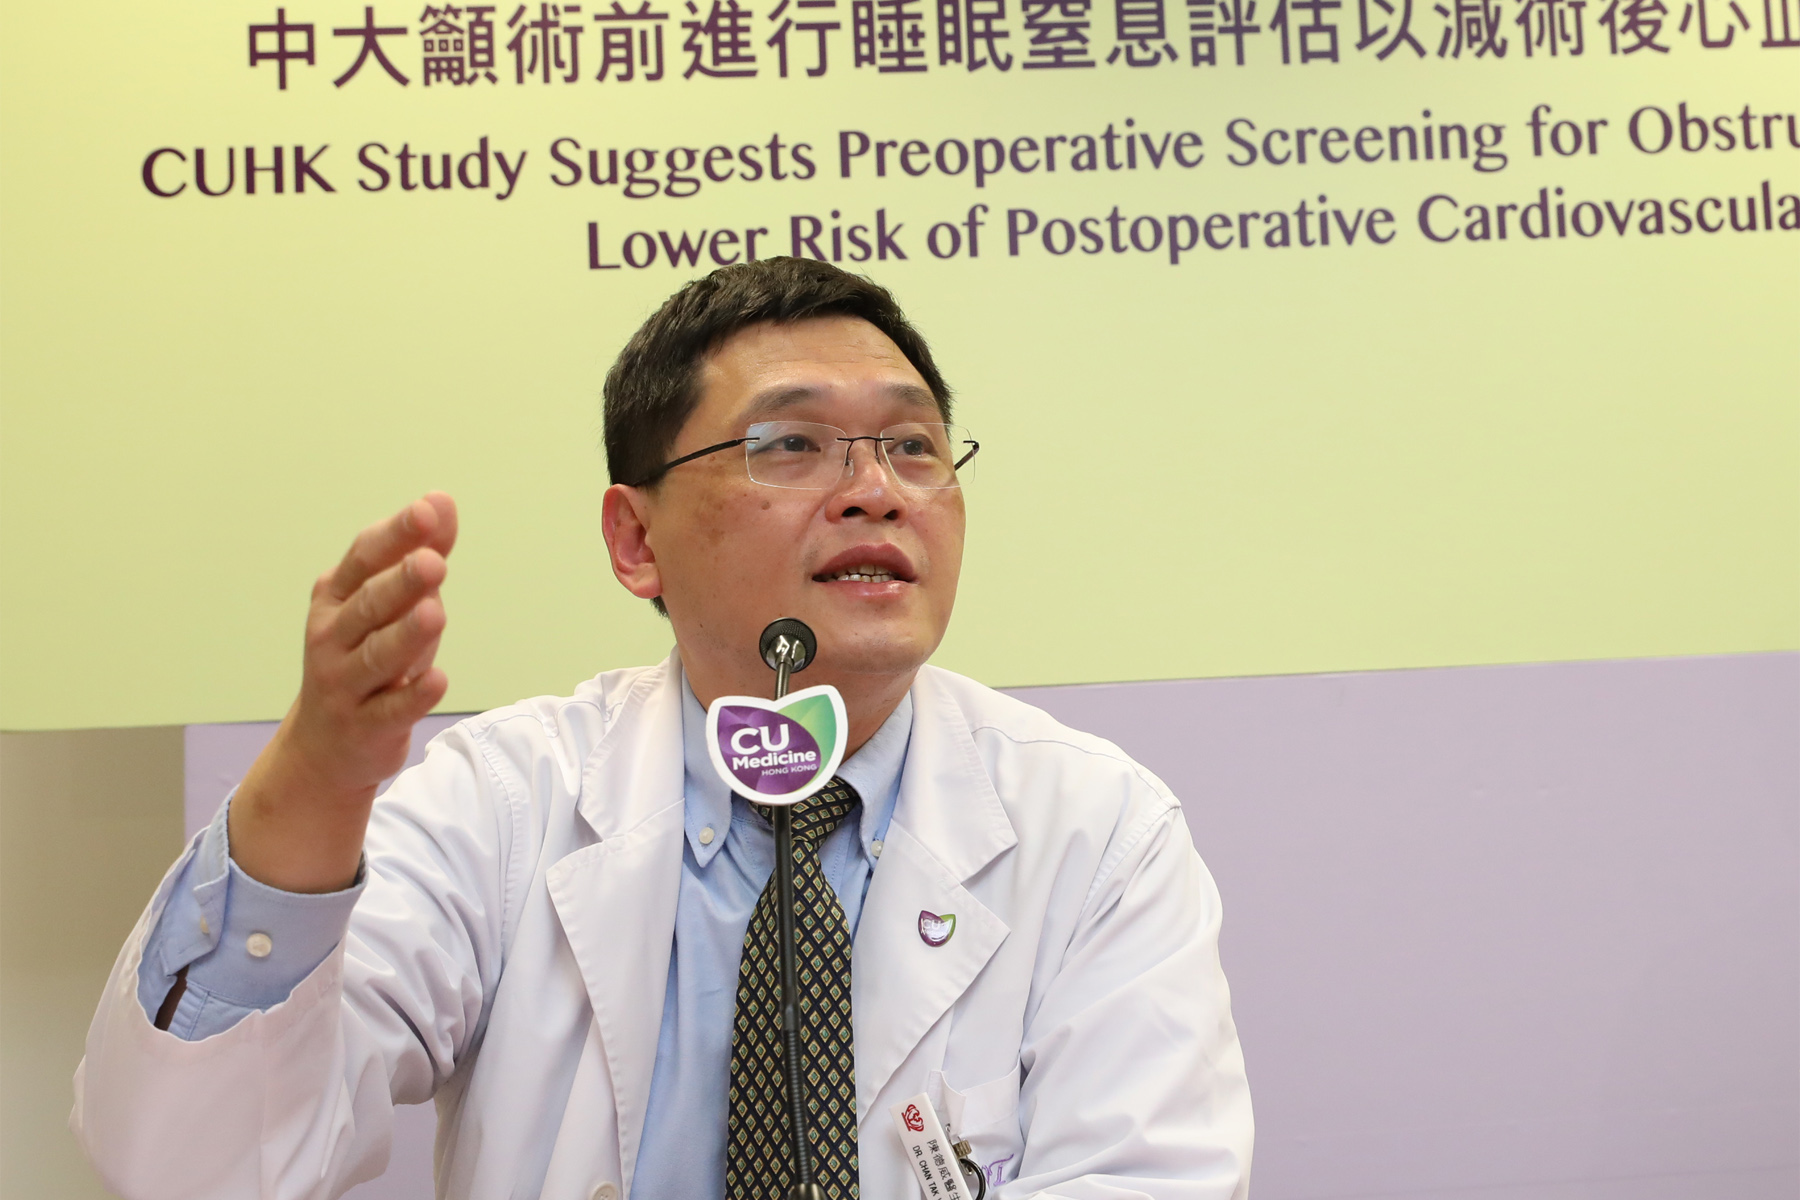 Professor Matthew Tak Vai CHAN, Professor in the Department of Anaesthesia and Intensive Care, Faculty of Medicine at CUHK says treatment such as oxygen therapy and positive airway pressure may help patients with severe OSA lower the risk of postoperative cardiovascular complications, as conditions like nocturnal hypoxia reduce.